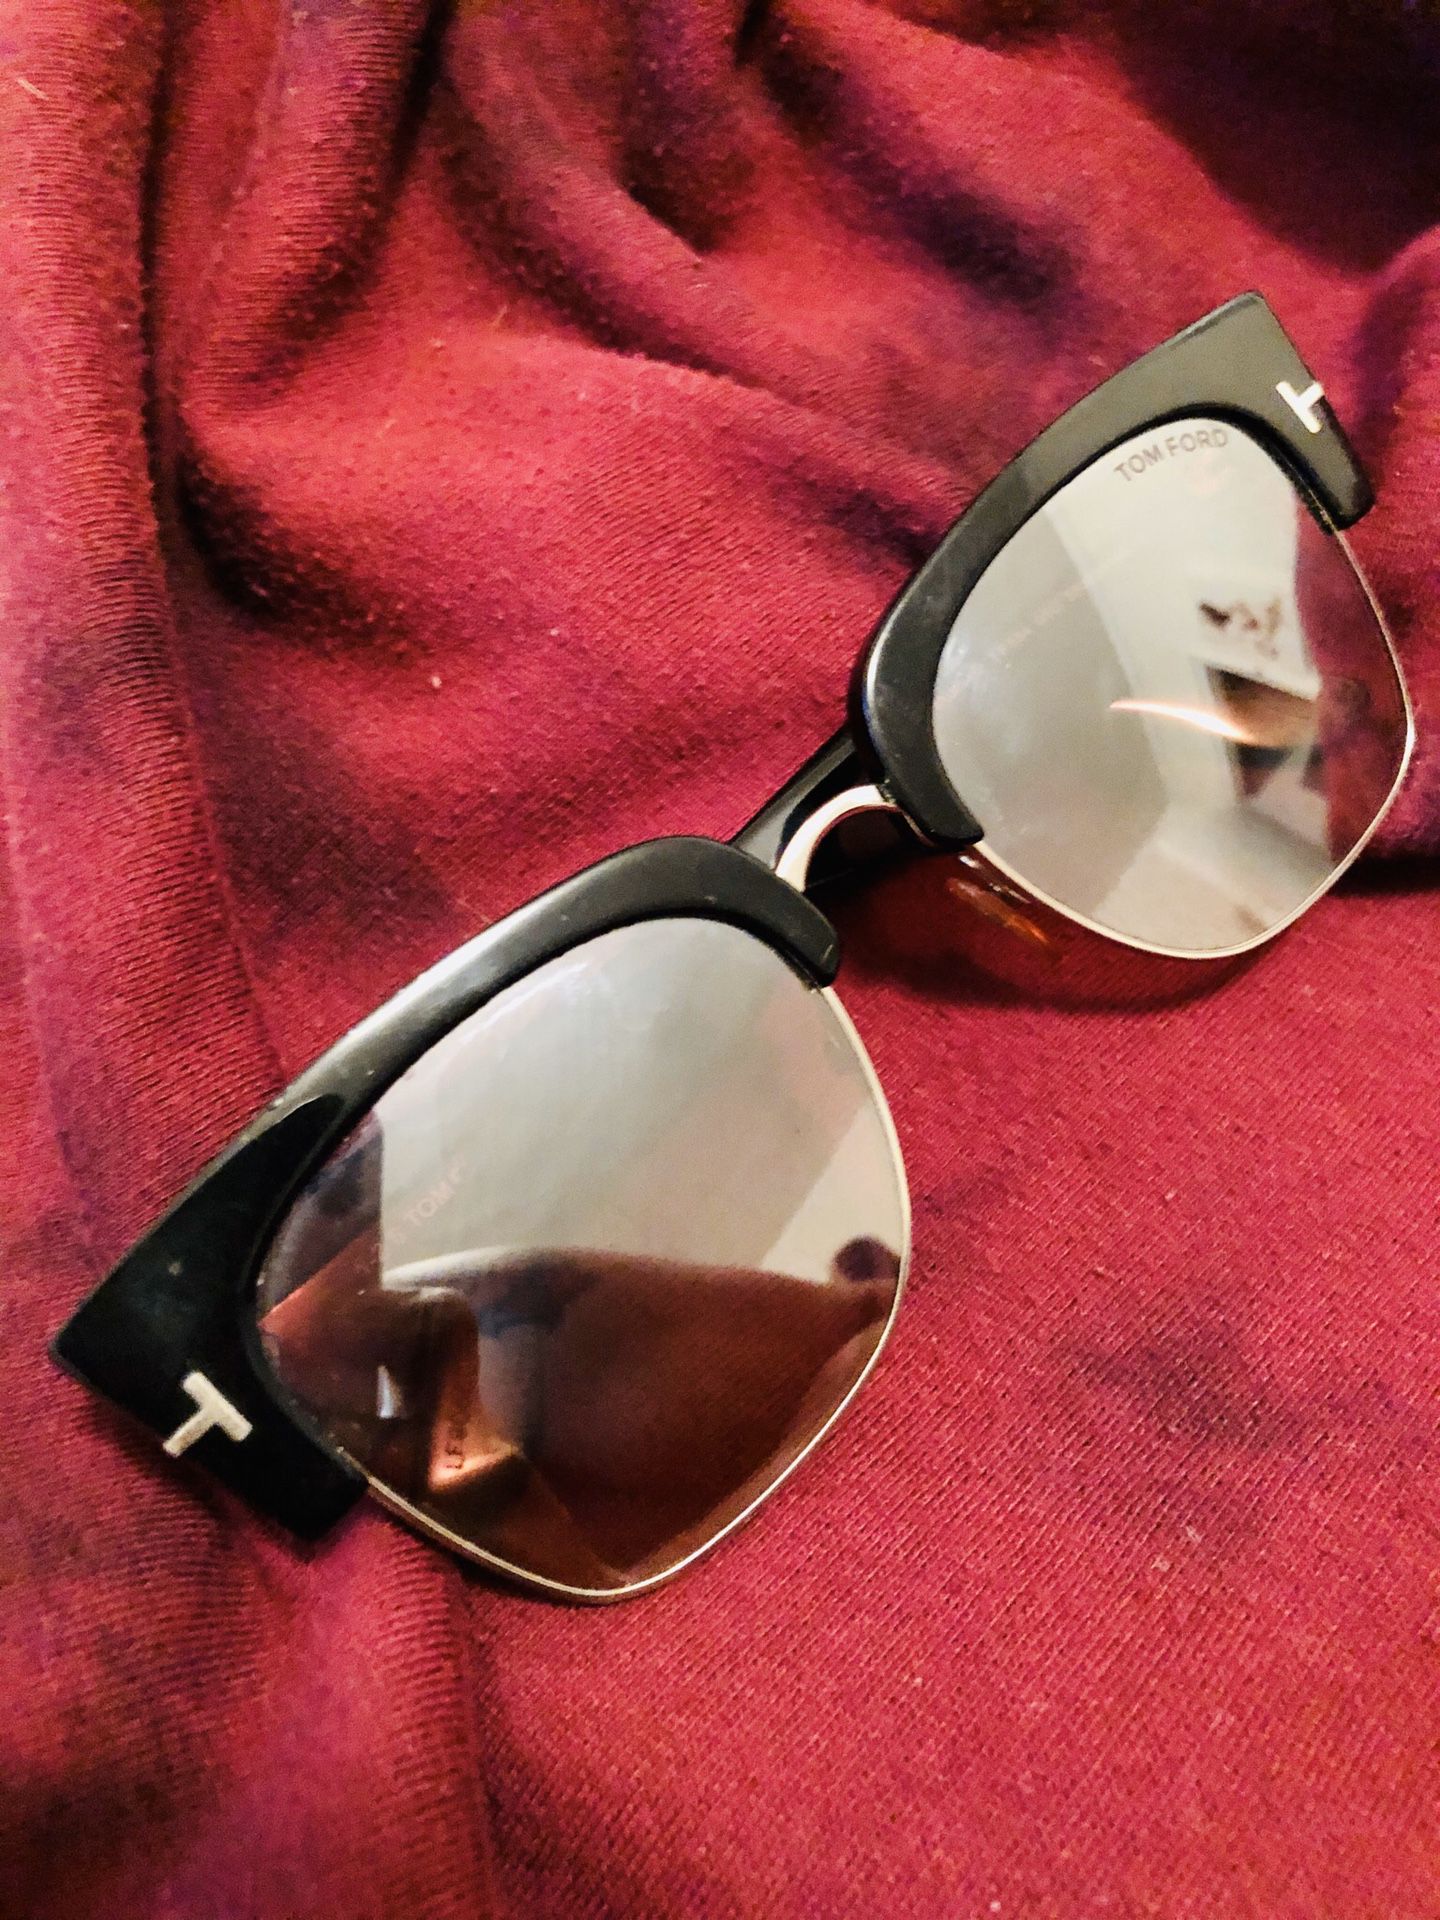 Tom Ford sunglasses (UNISEX) perfect condition with box and authentic TOMFORD case.